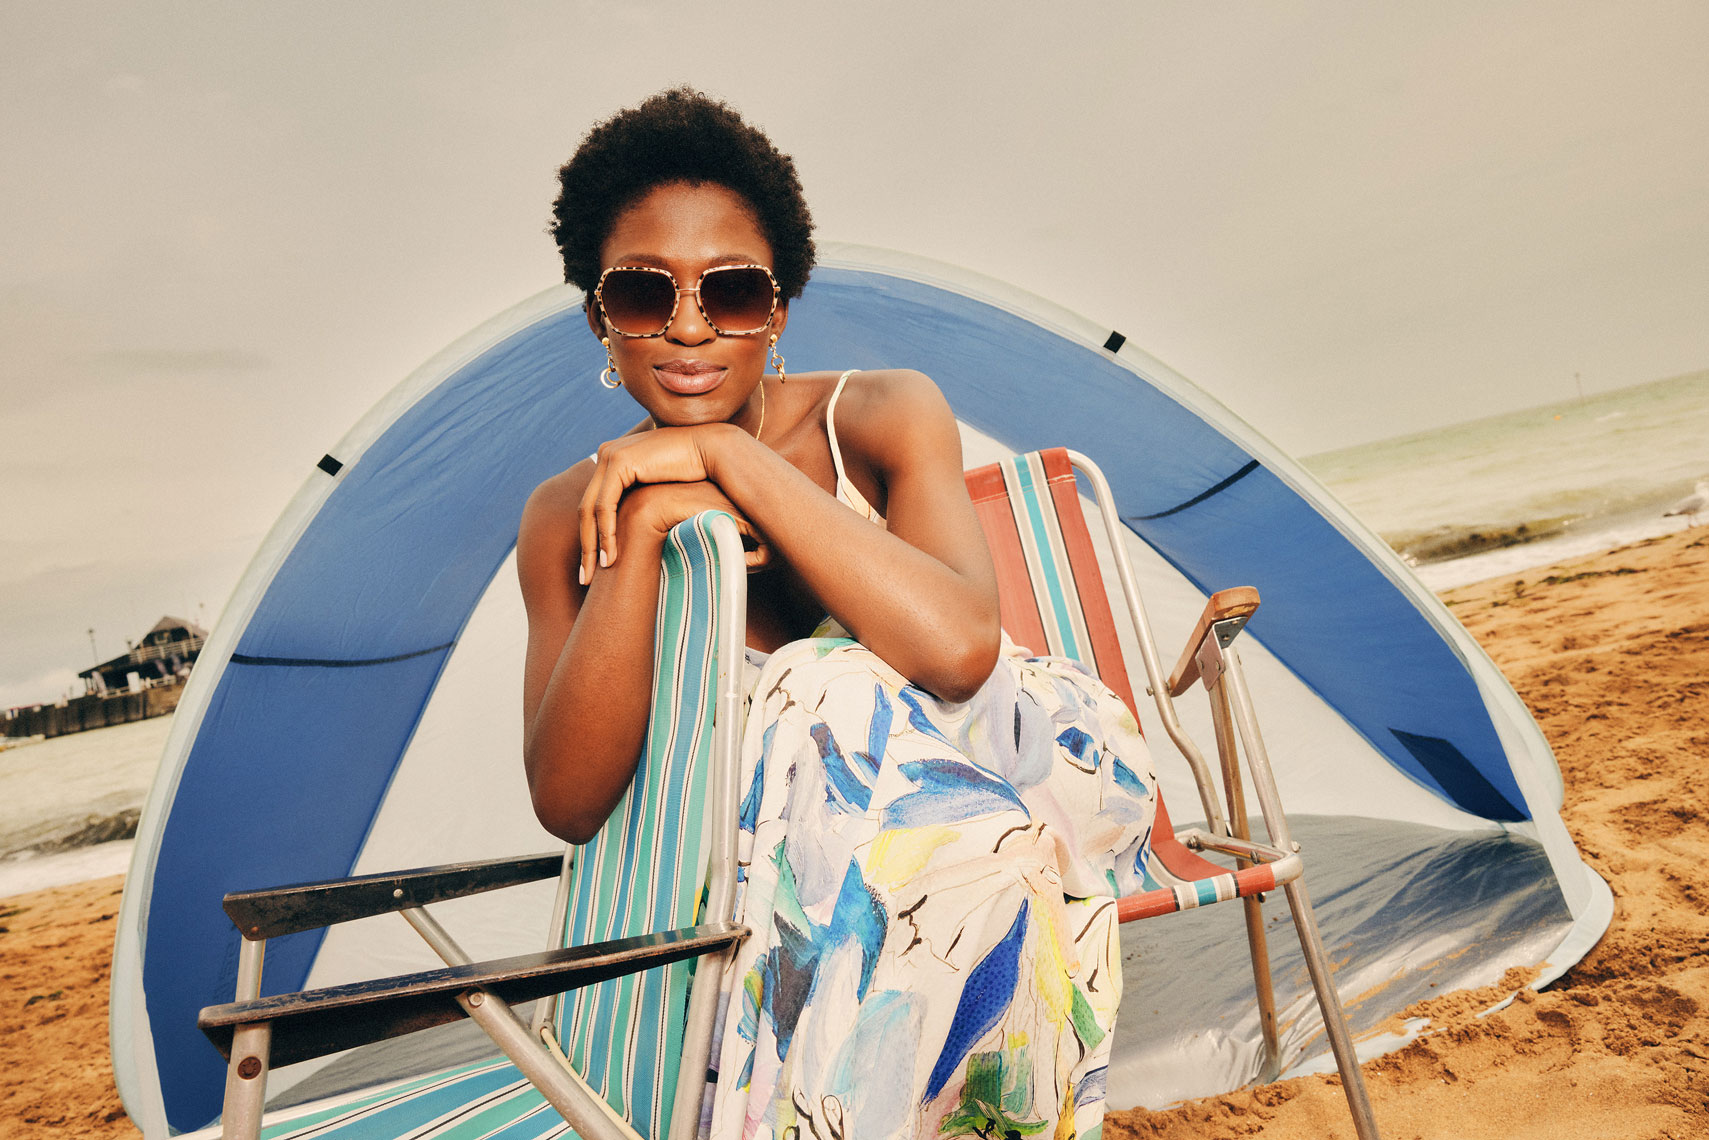 issie-gibbons-fashion-stylist-ted-baker-high-summer-campaign-british-seaside-tent